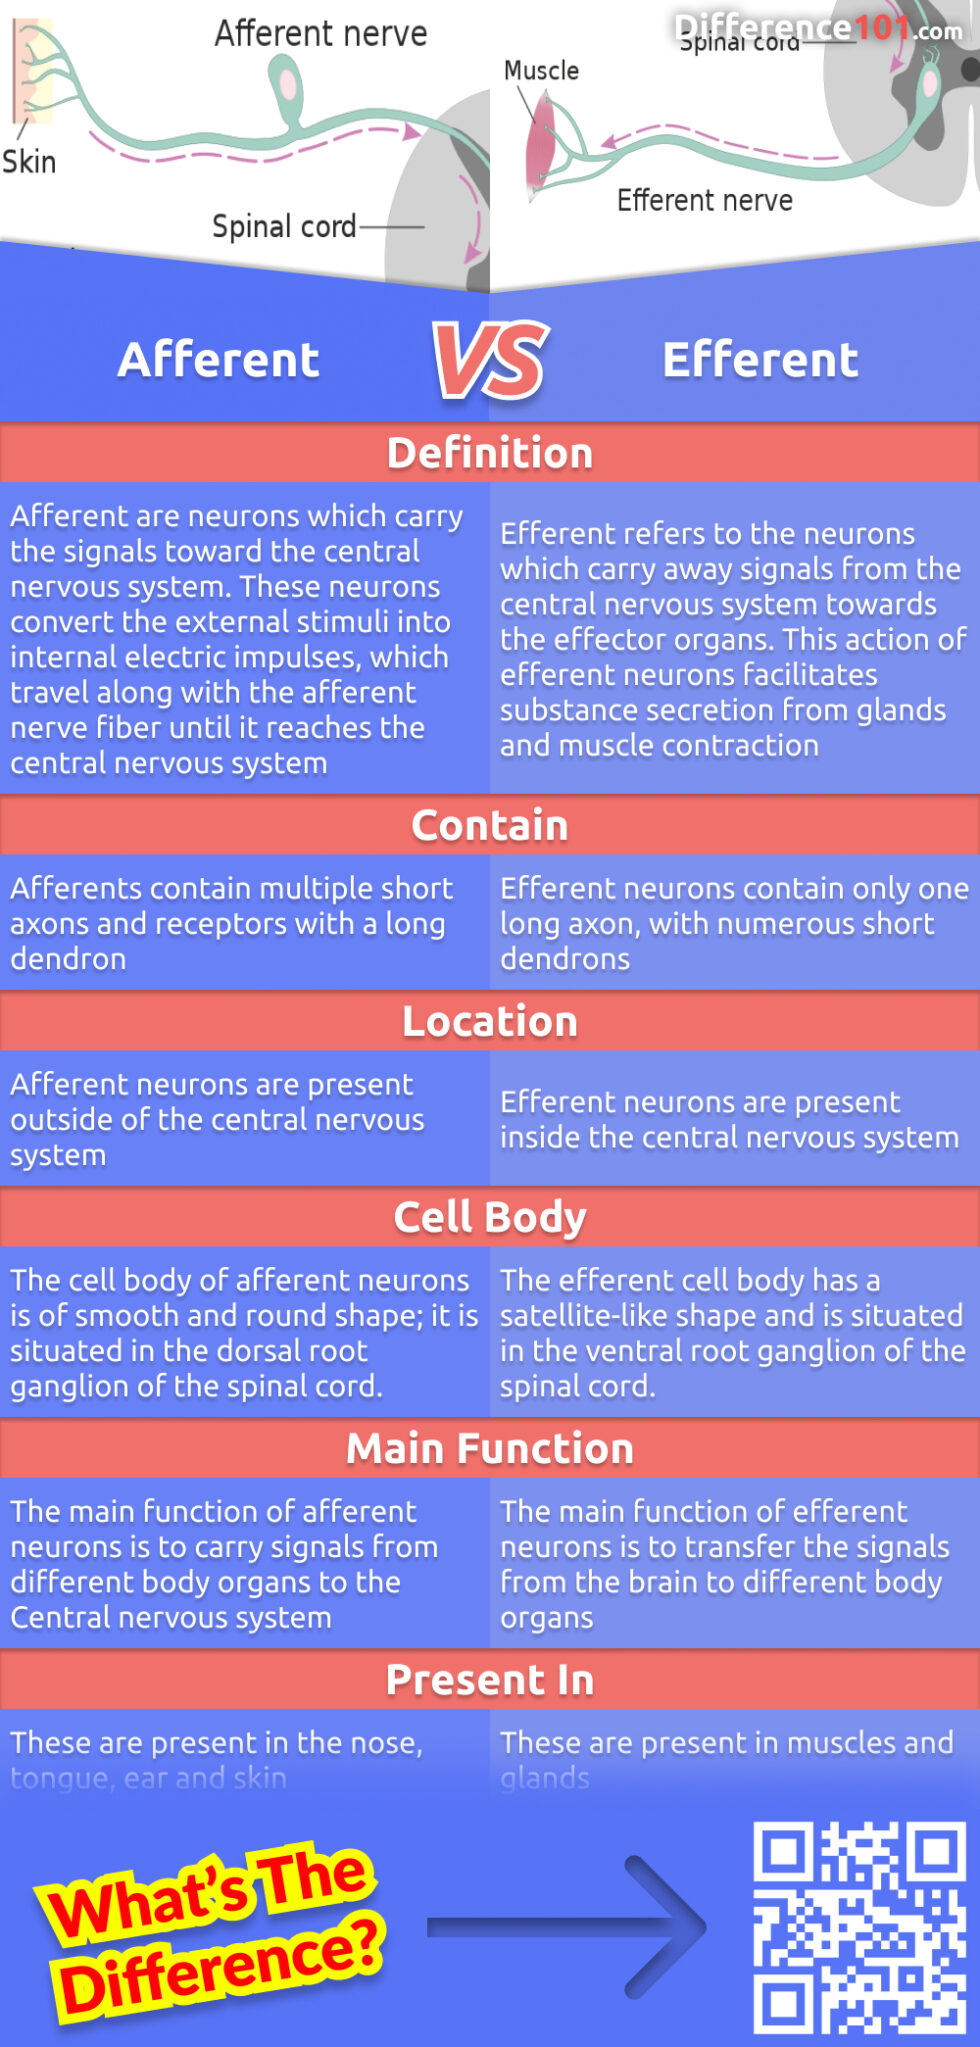 What is the difference between afferent and efferent? And what are the pros and cons of each? Read on to learn more about these two types of neurons and how they compare.